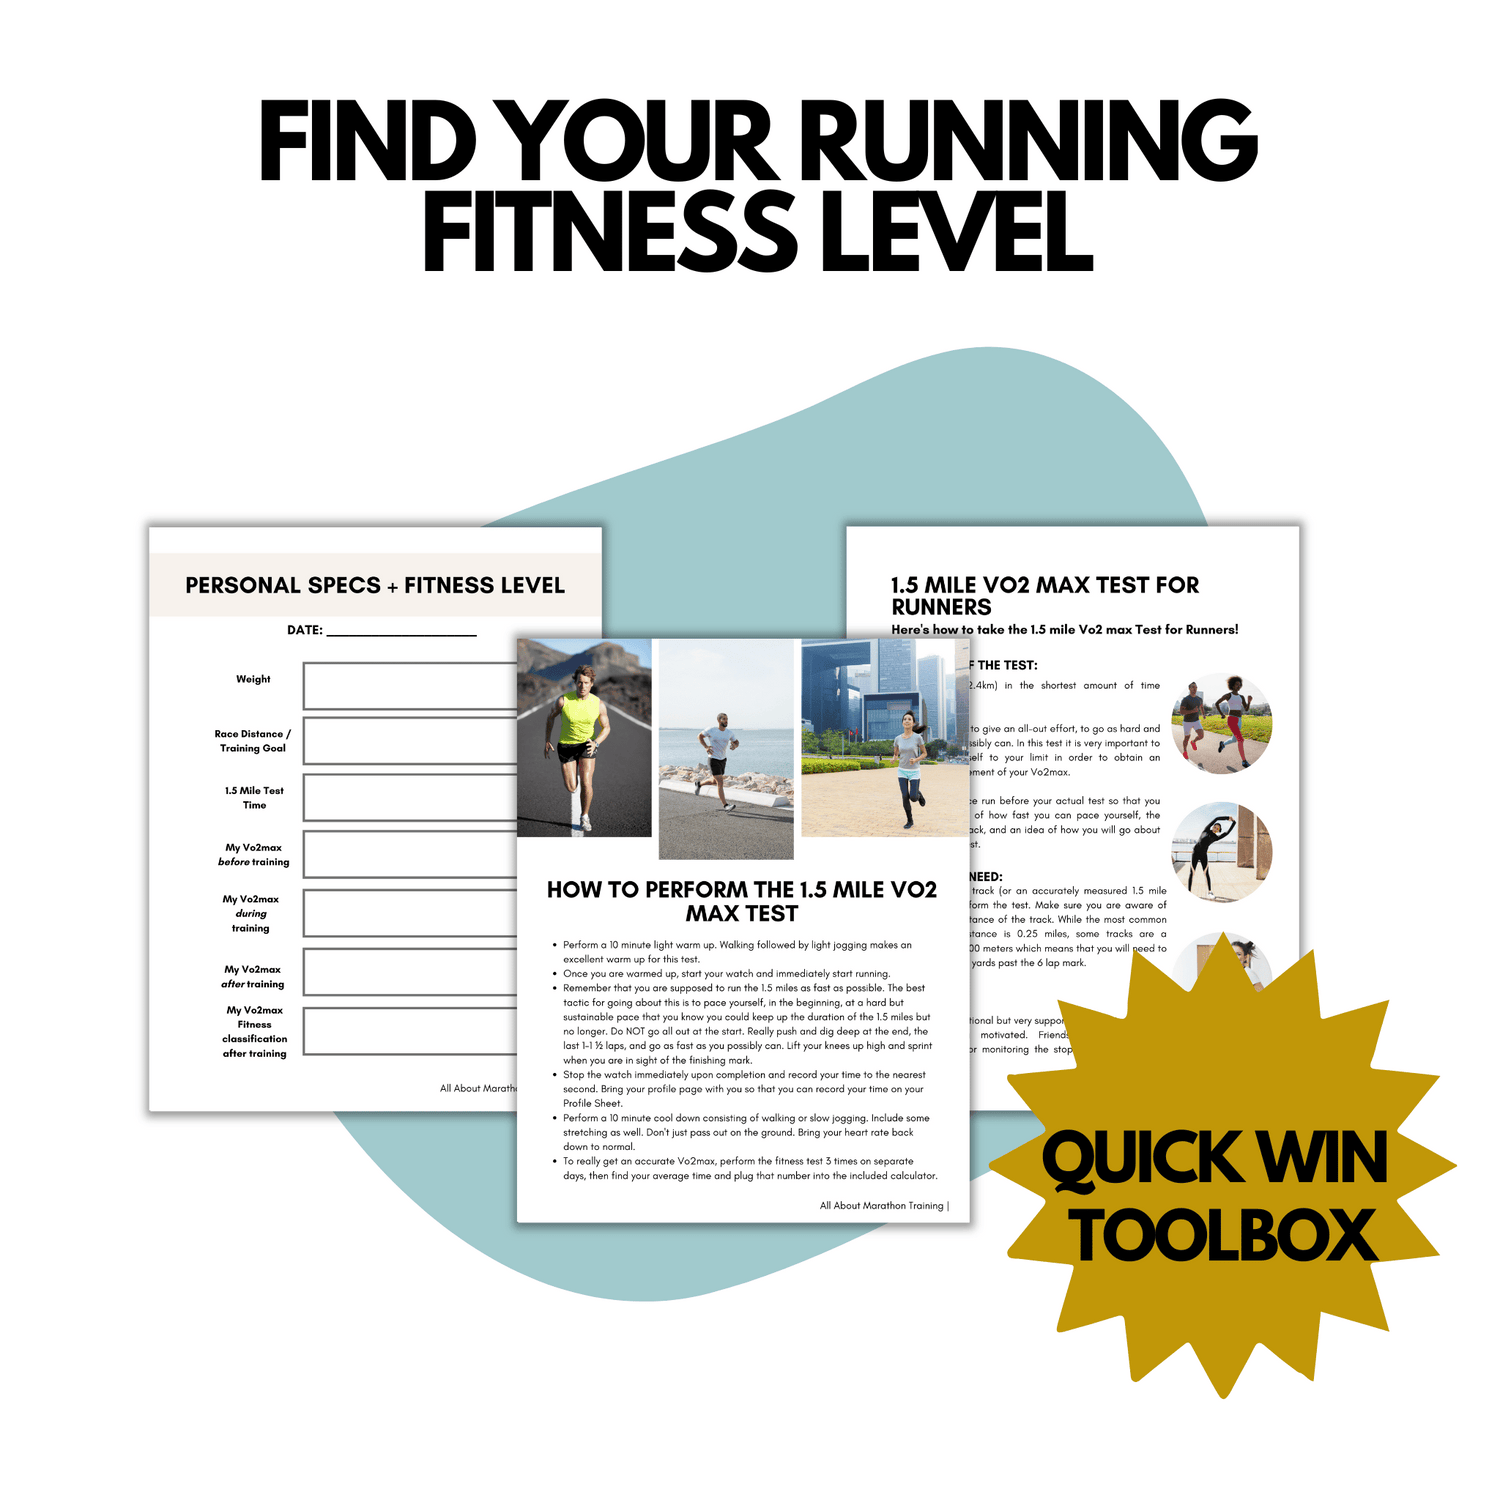 Another Mockup of the Running Fitness Level Toolbox for Runners